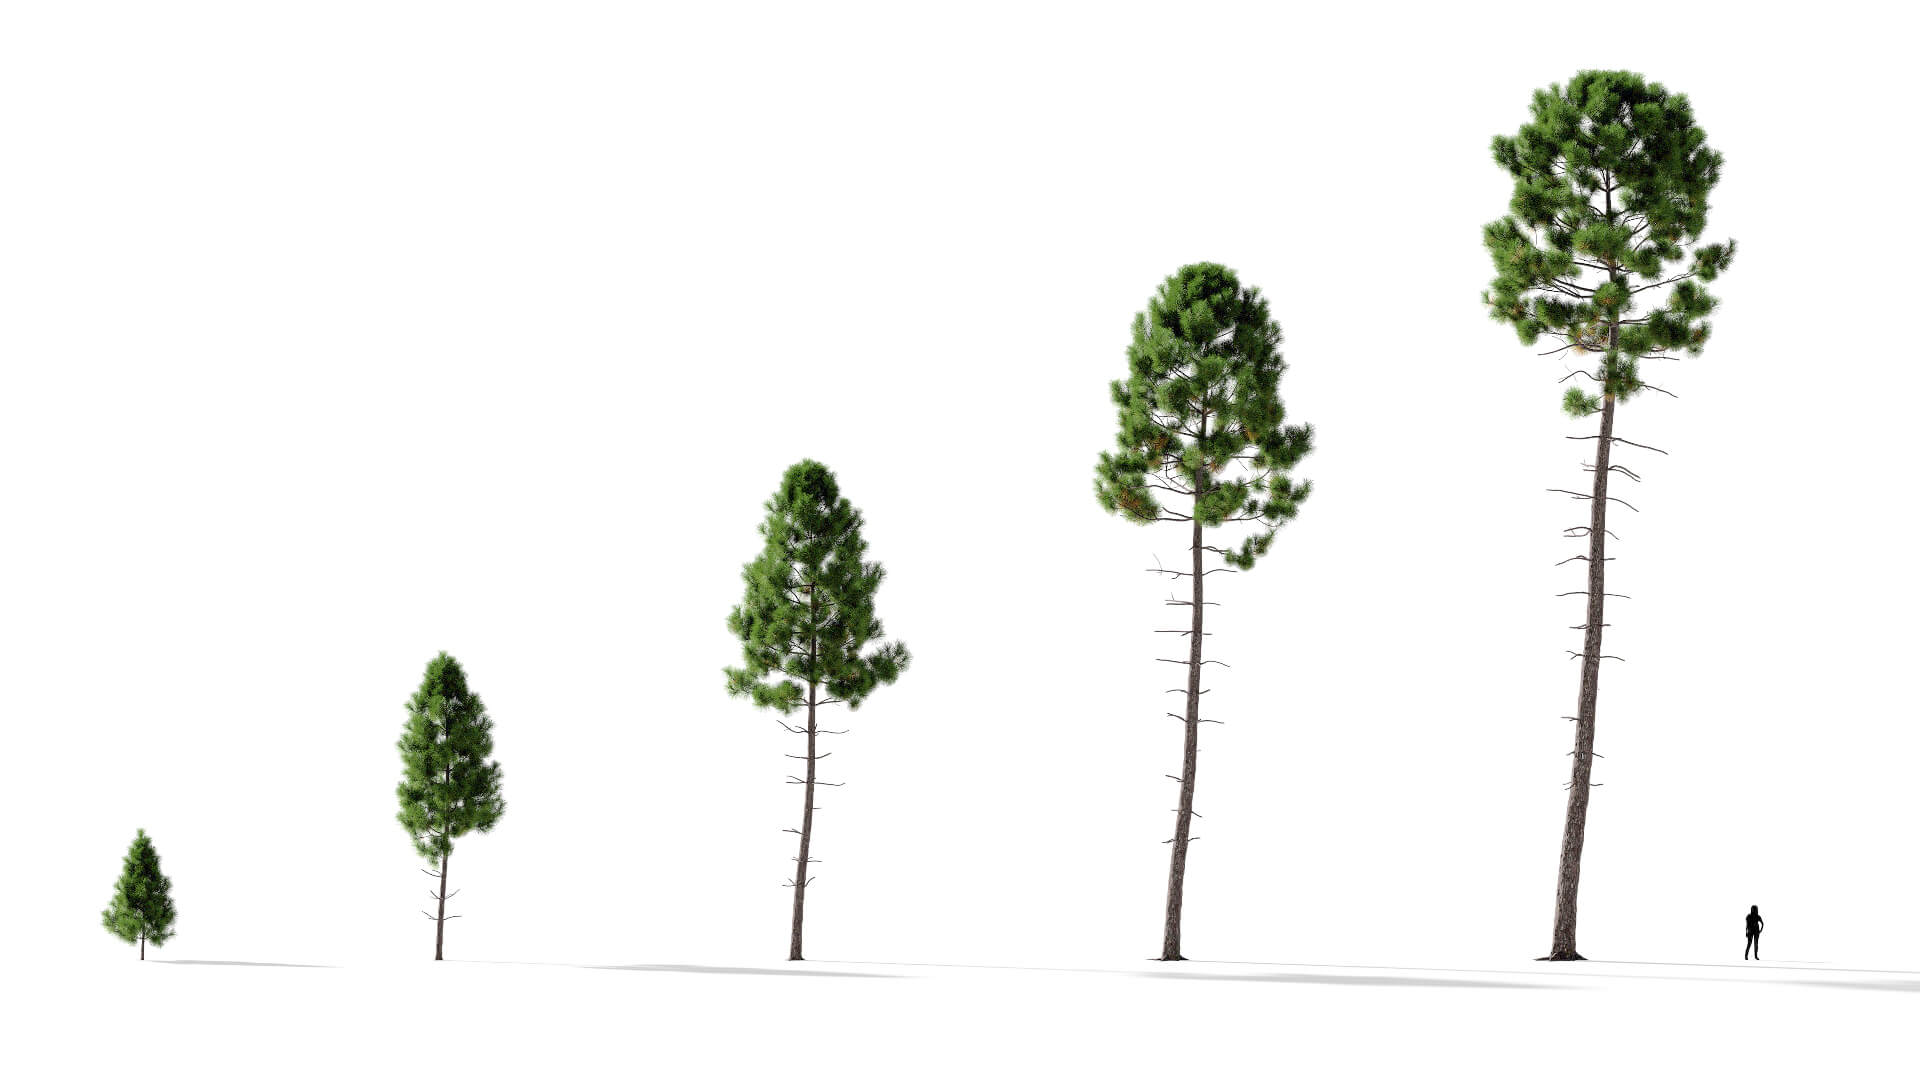 3D model of the Maritime pine forest Pinus pinaster forest maturity variations